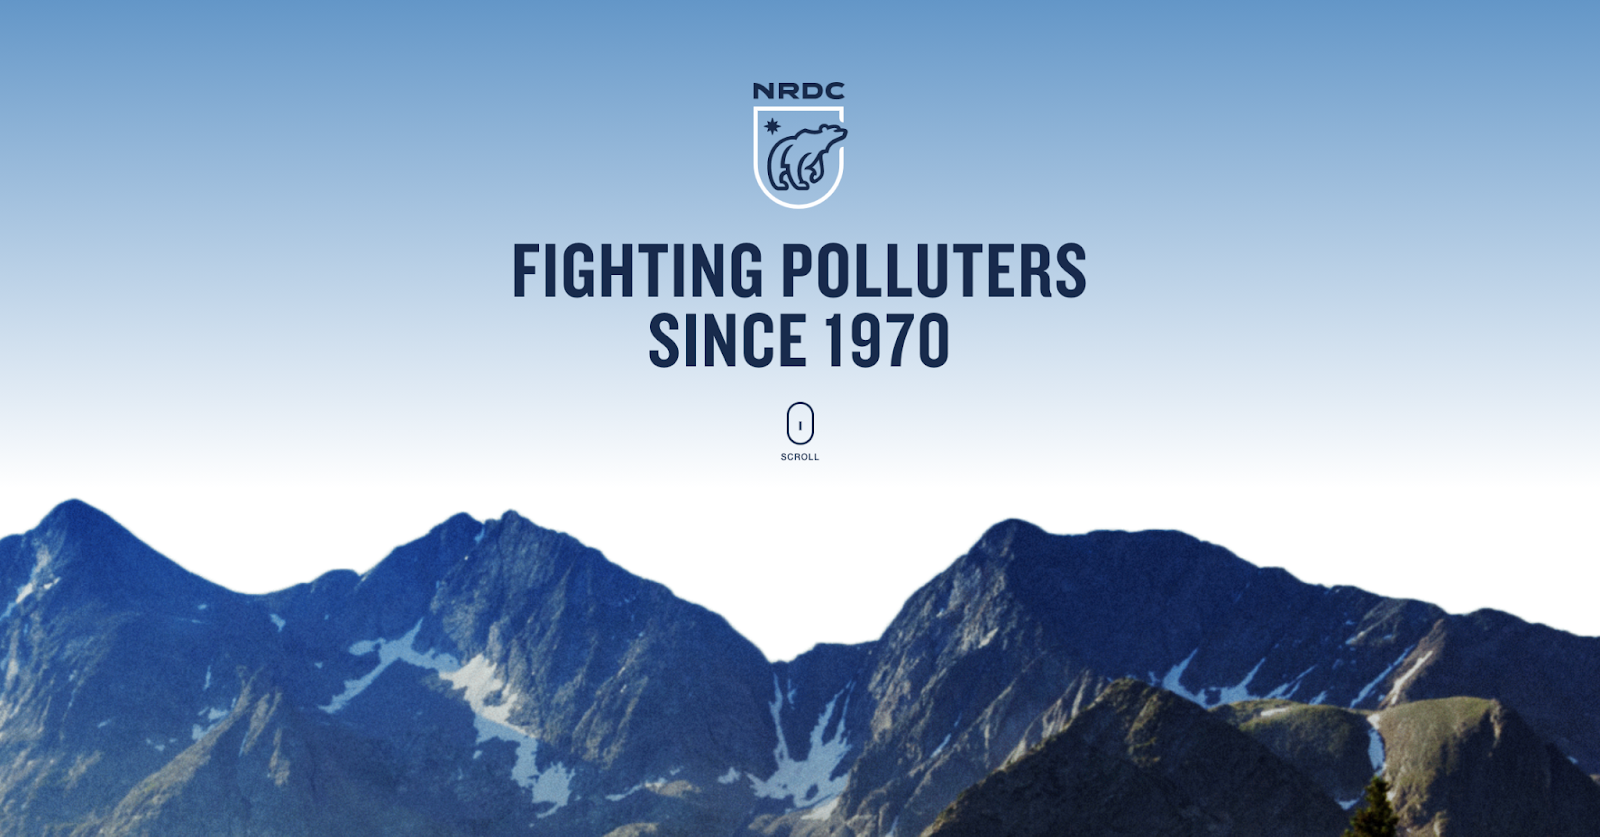 NRDC nominated for a Webby Award